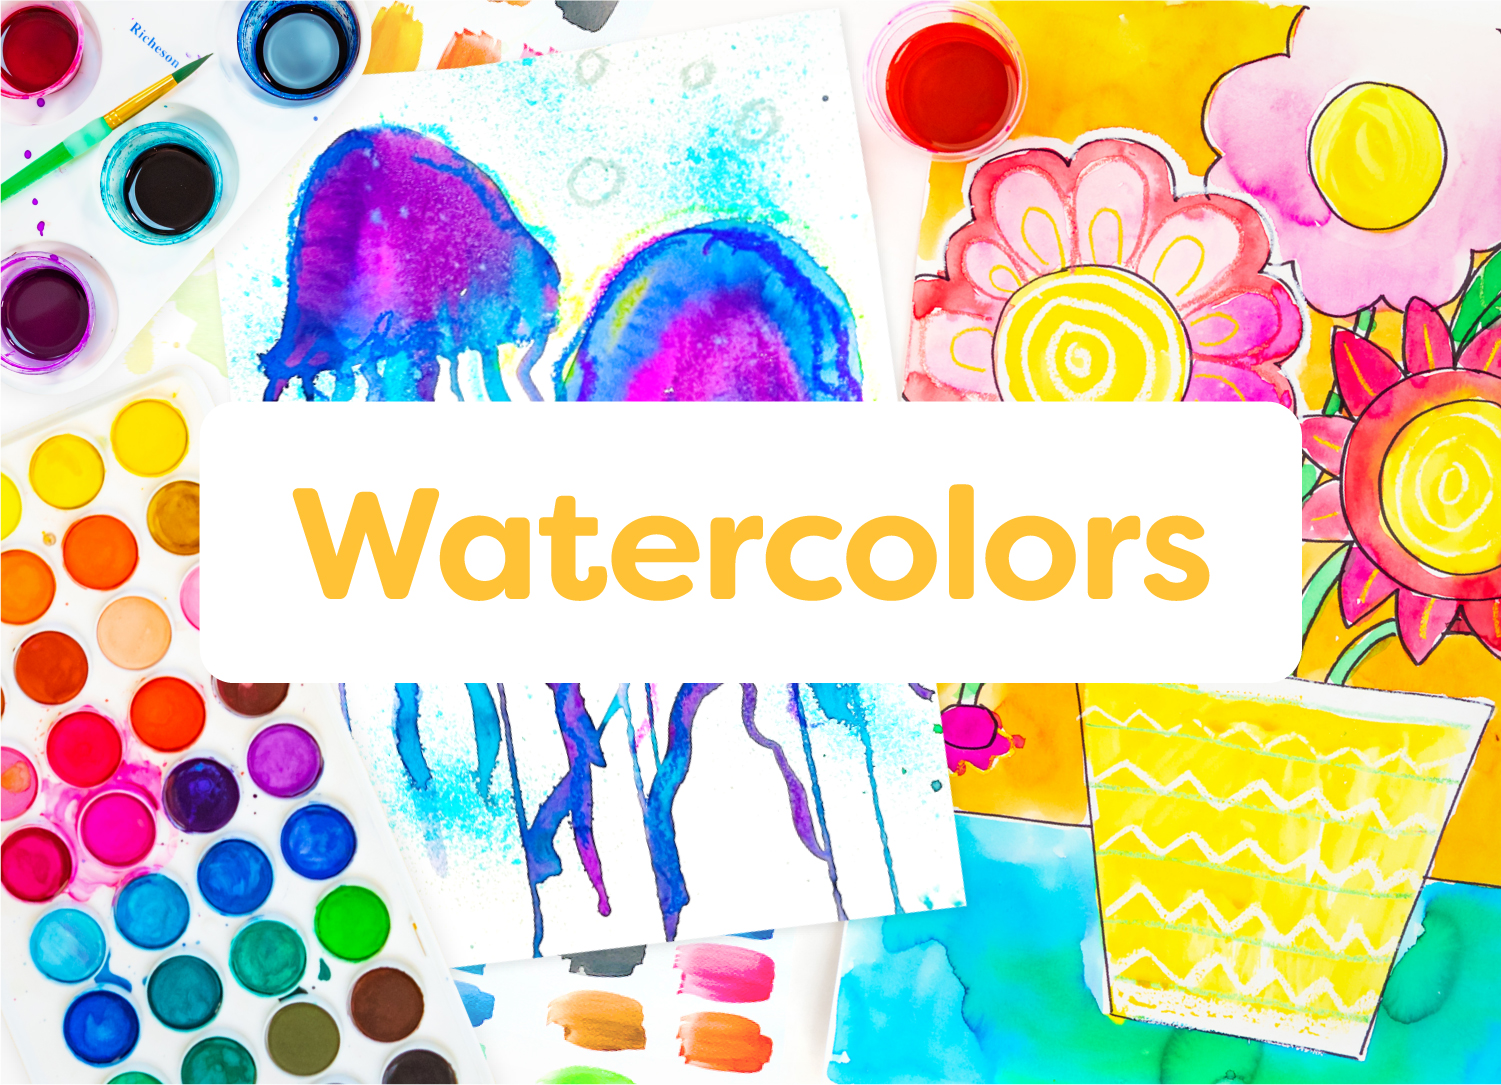 Watercolors; art lessons for kids by category